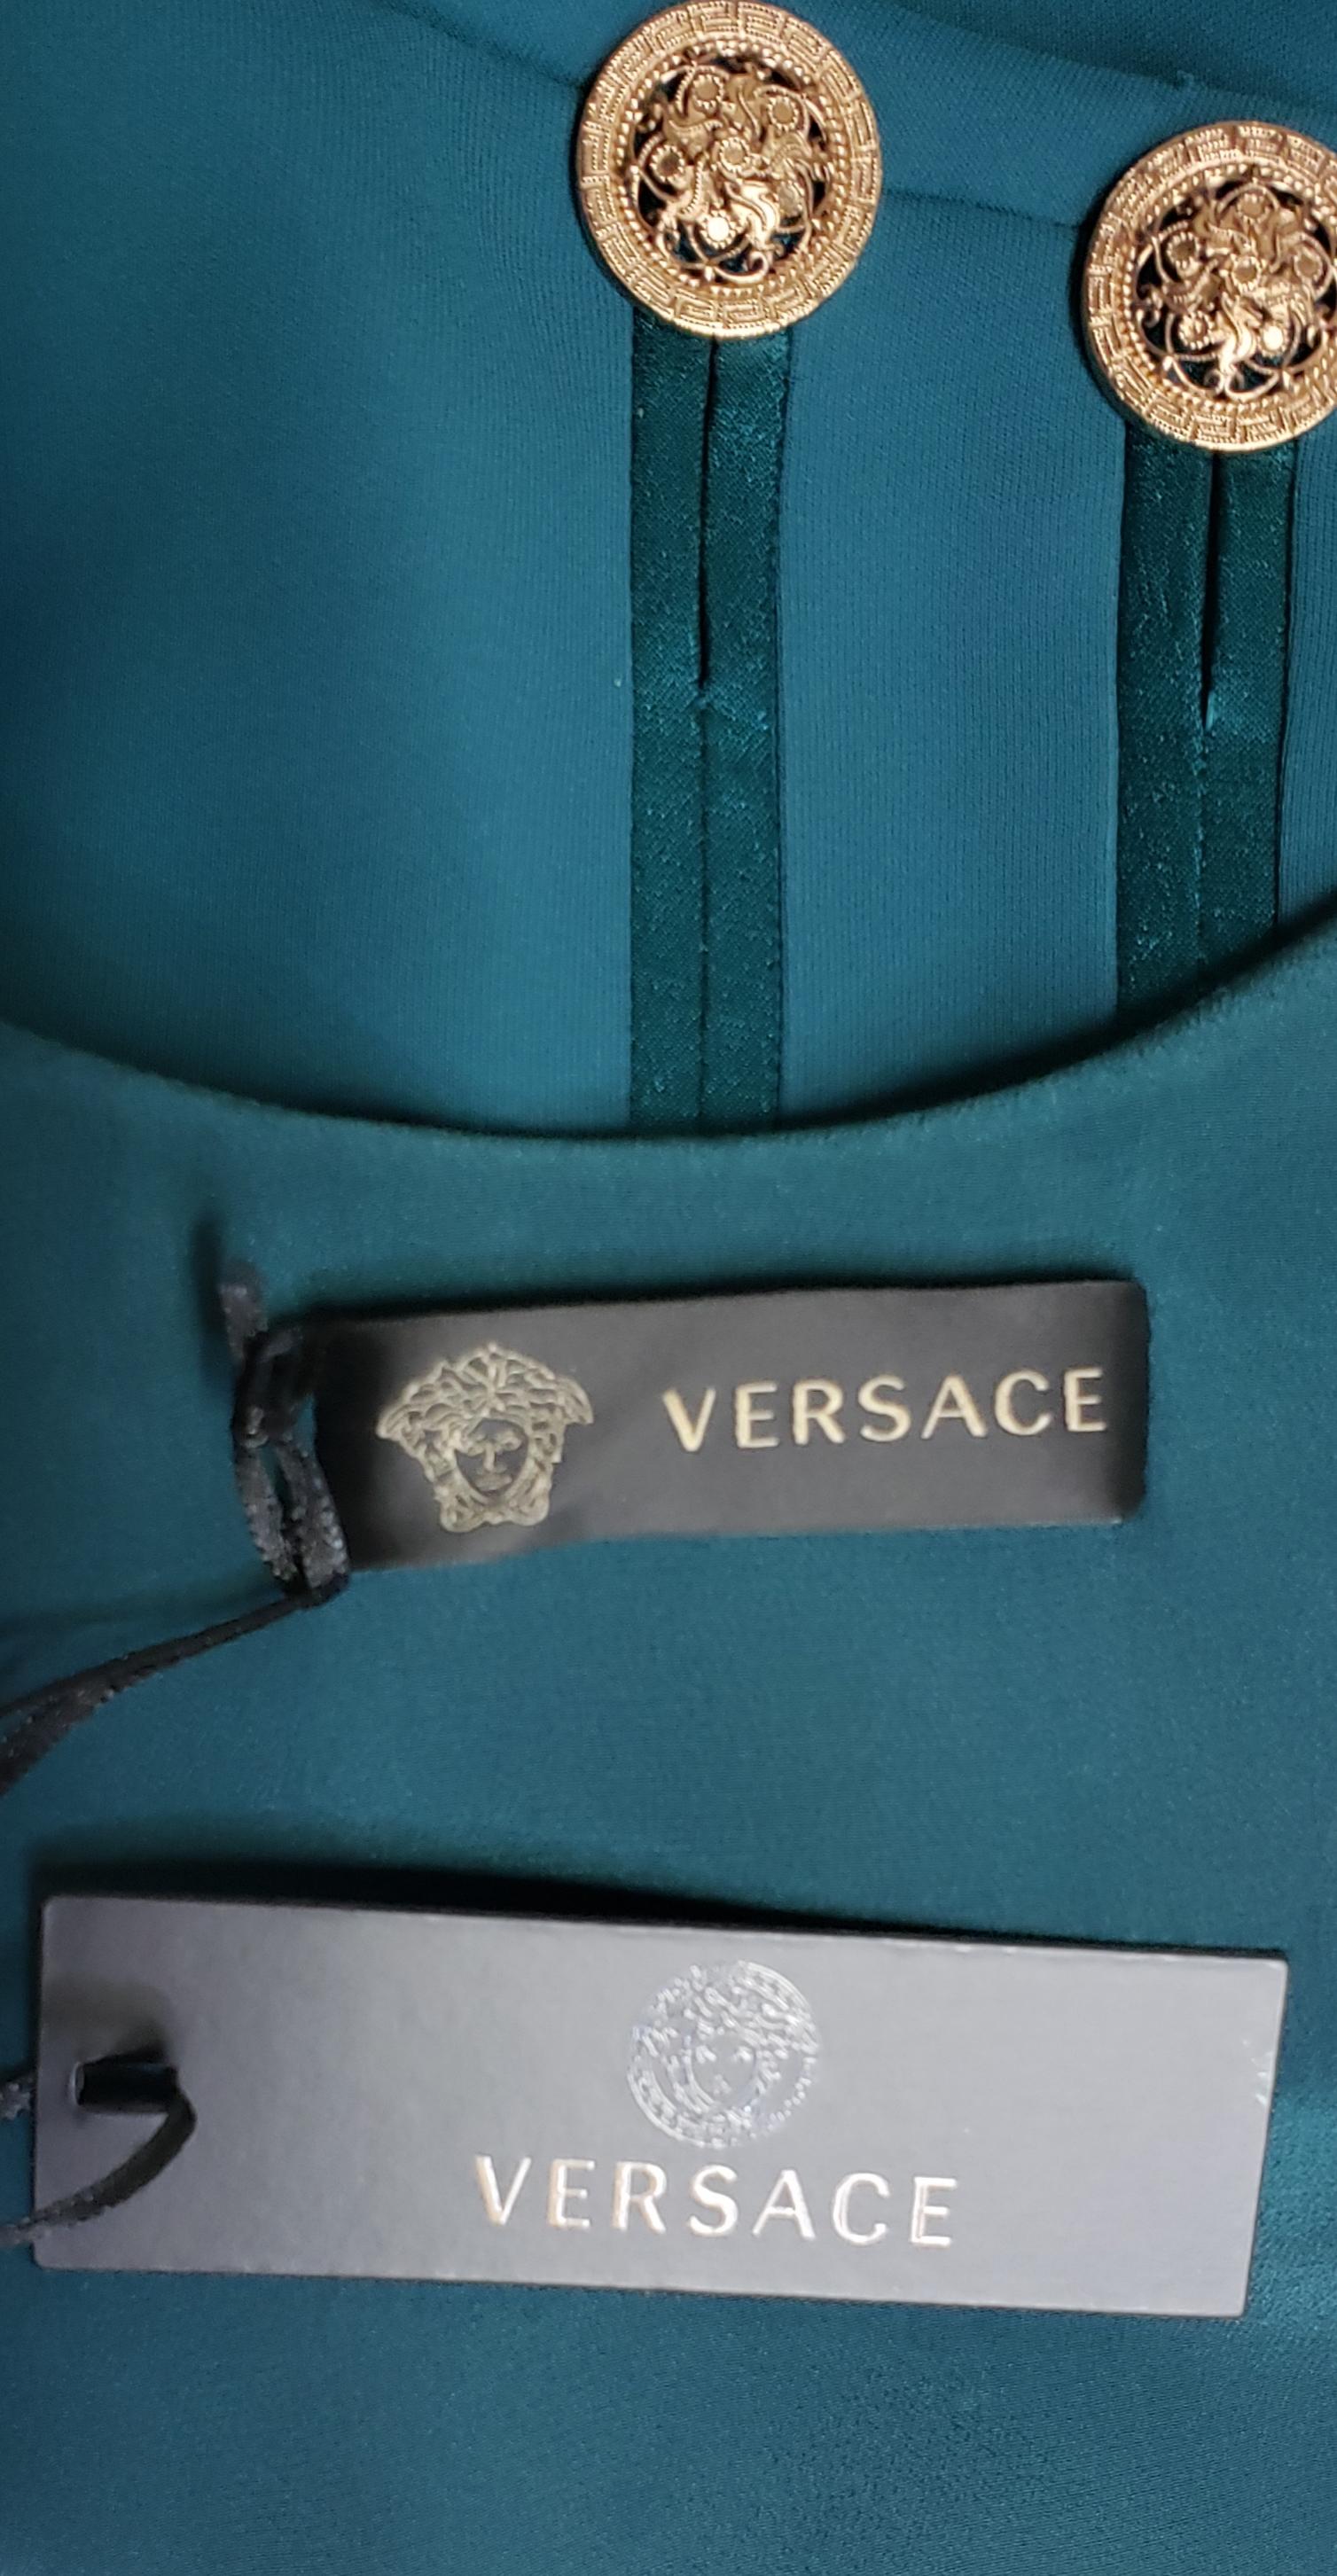 F/W 2014 look # 2 NEW VERSACE GREEN DRESS 38 - 2 For Sale 5